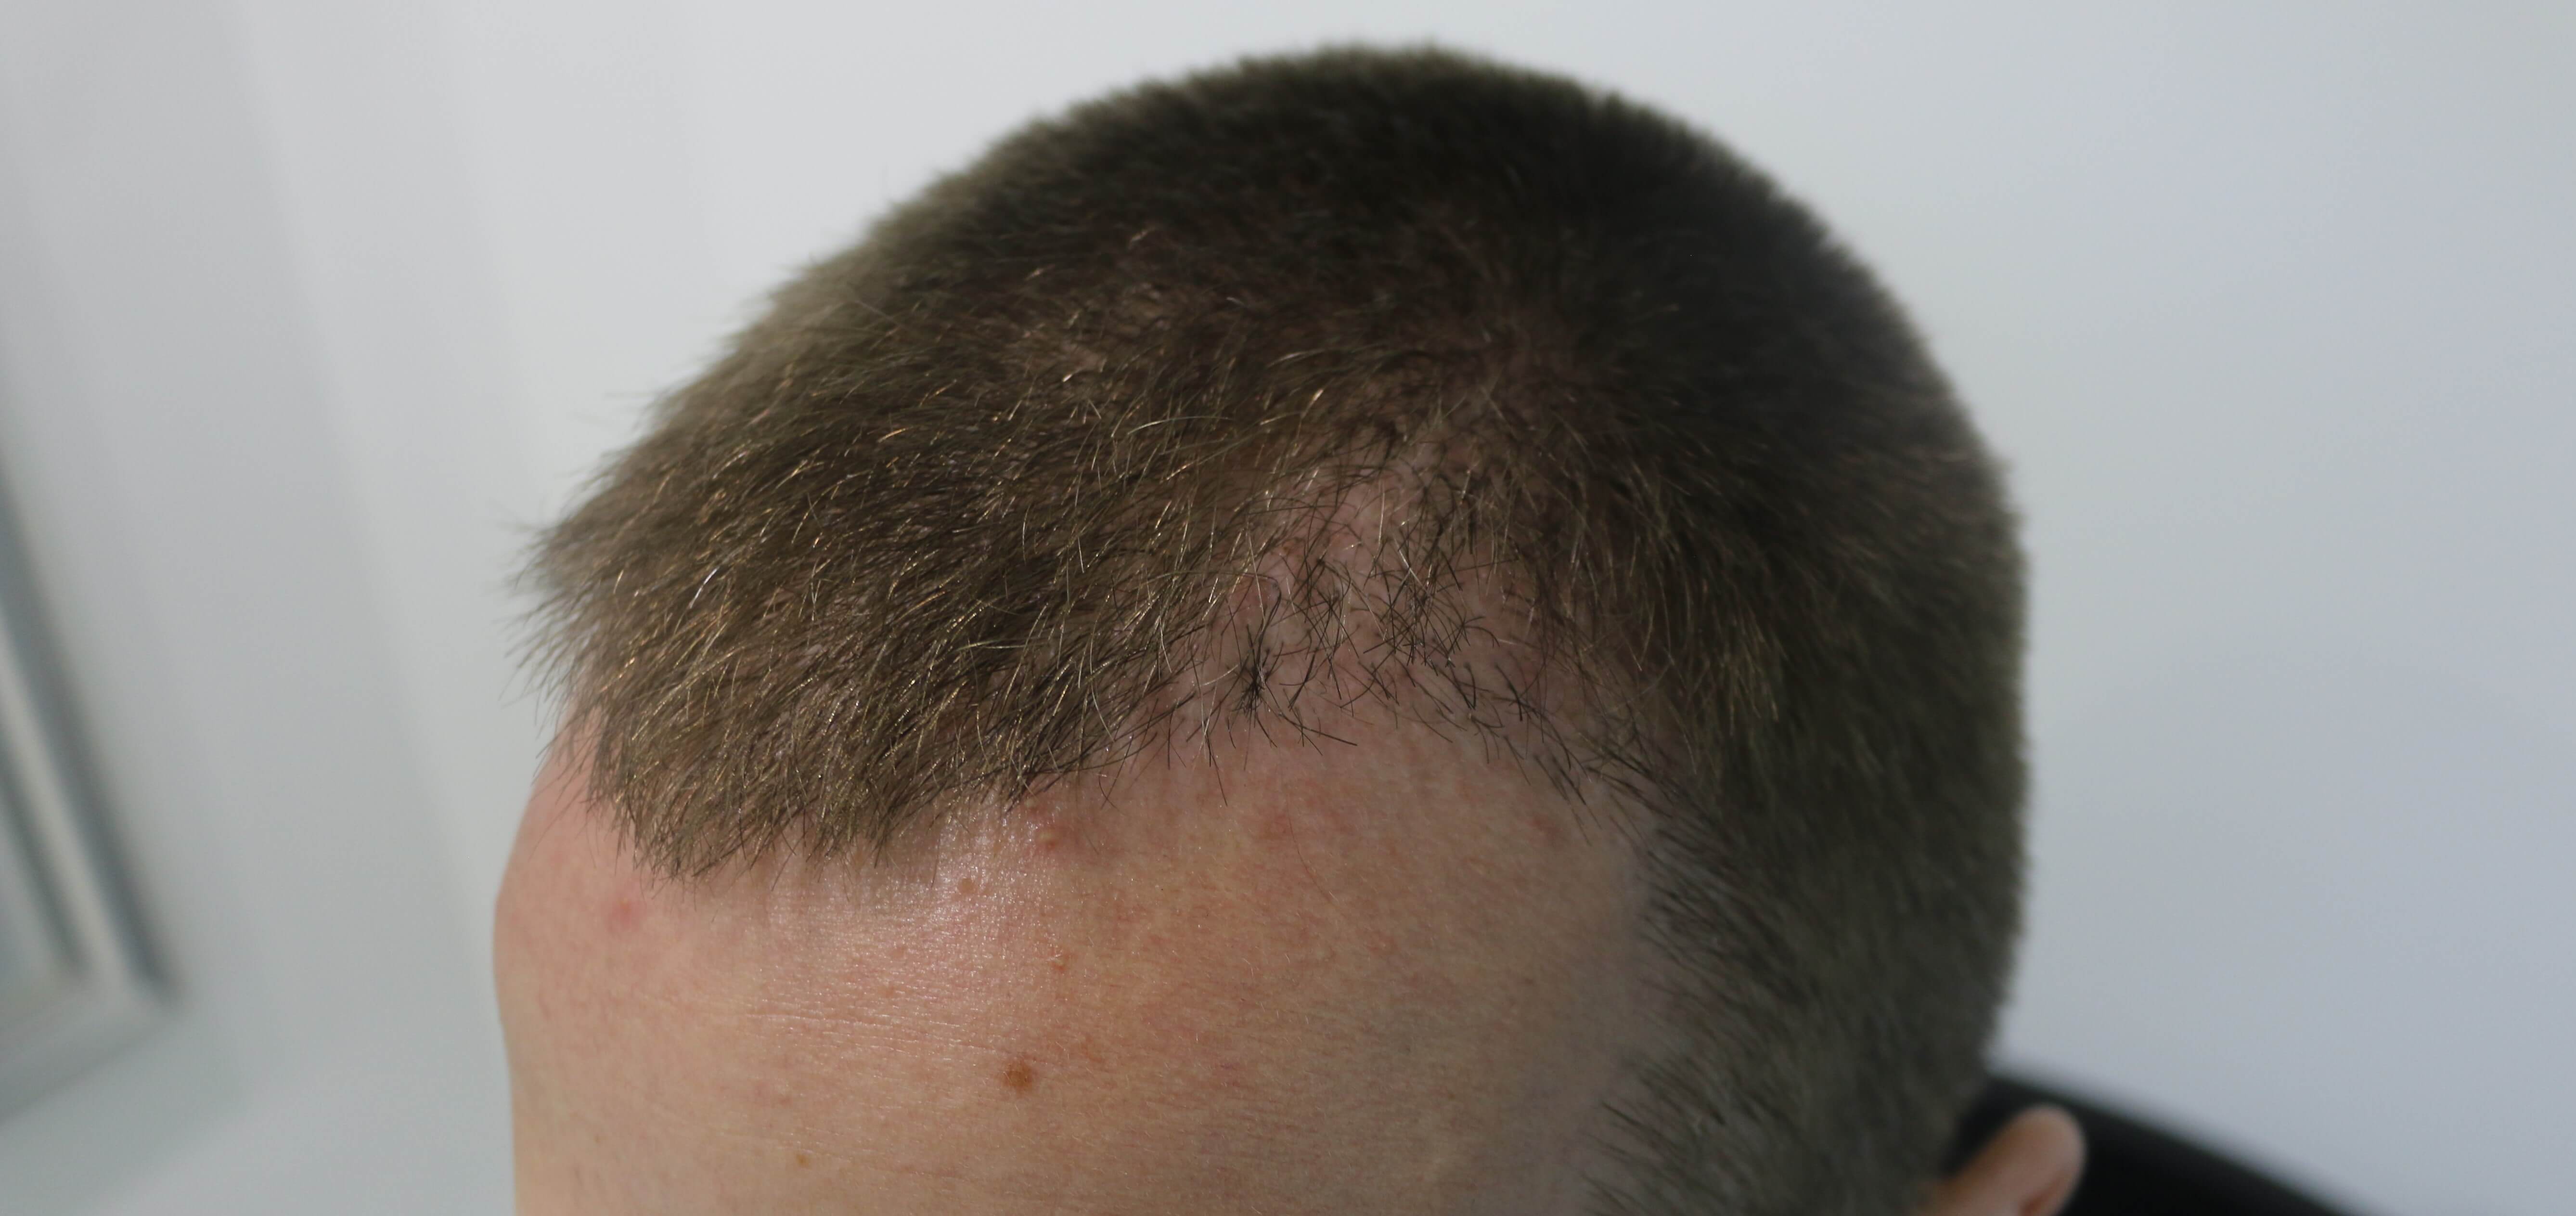 Hair Transplant Operation with DHI Technique in Turkey